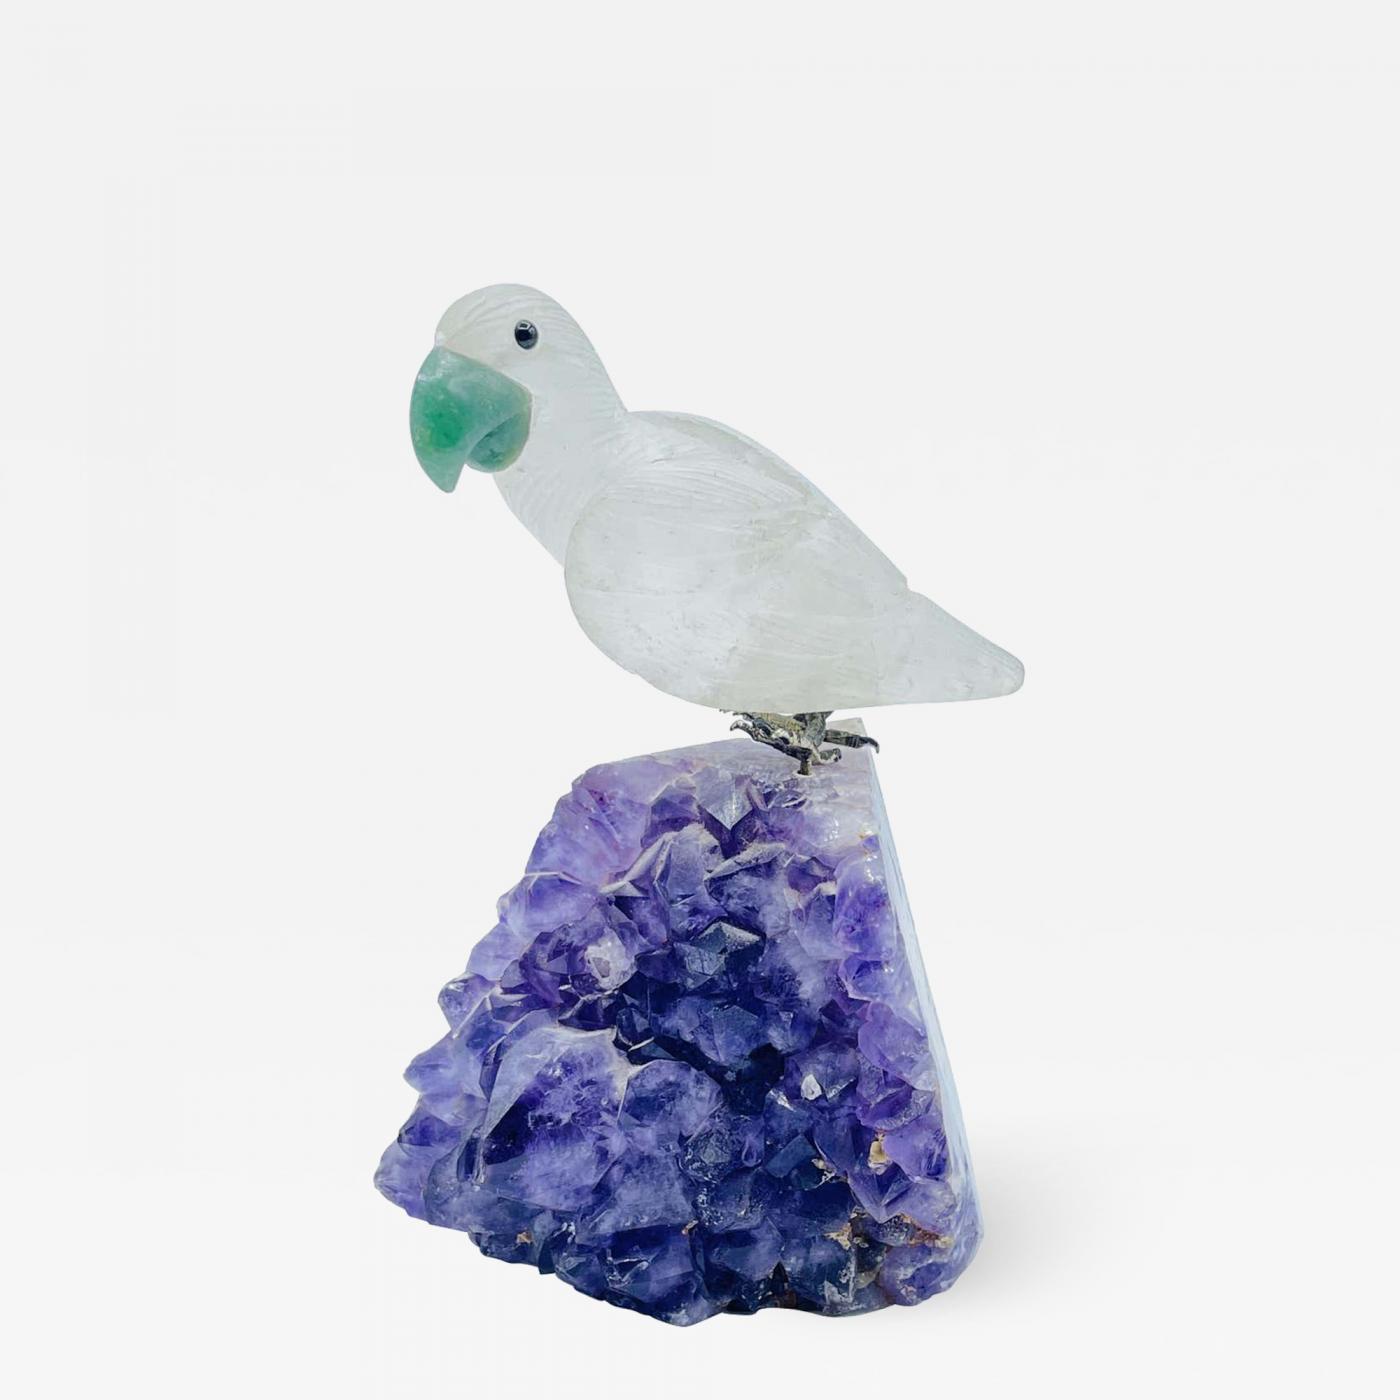 New! Quartz Crystal Carved Parrot with Amethyst Crystal Wings on a